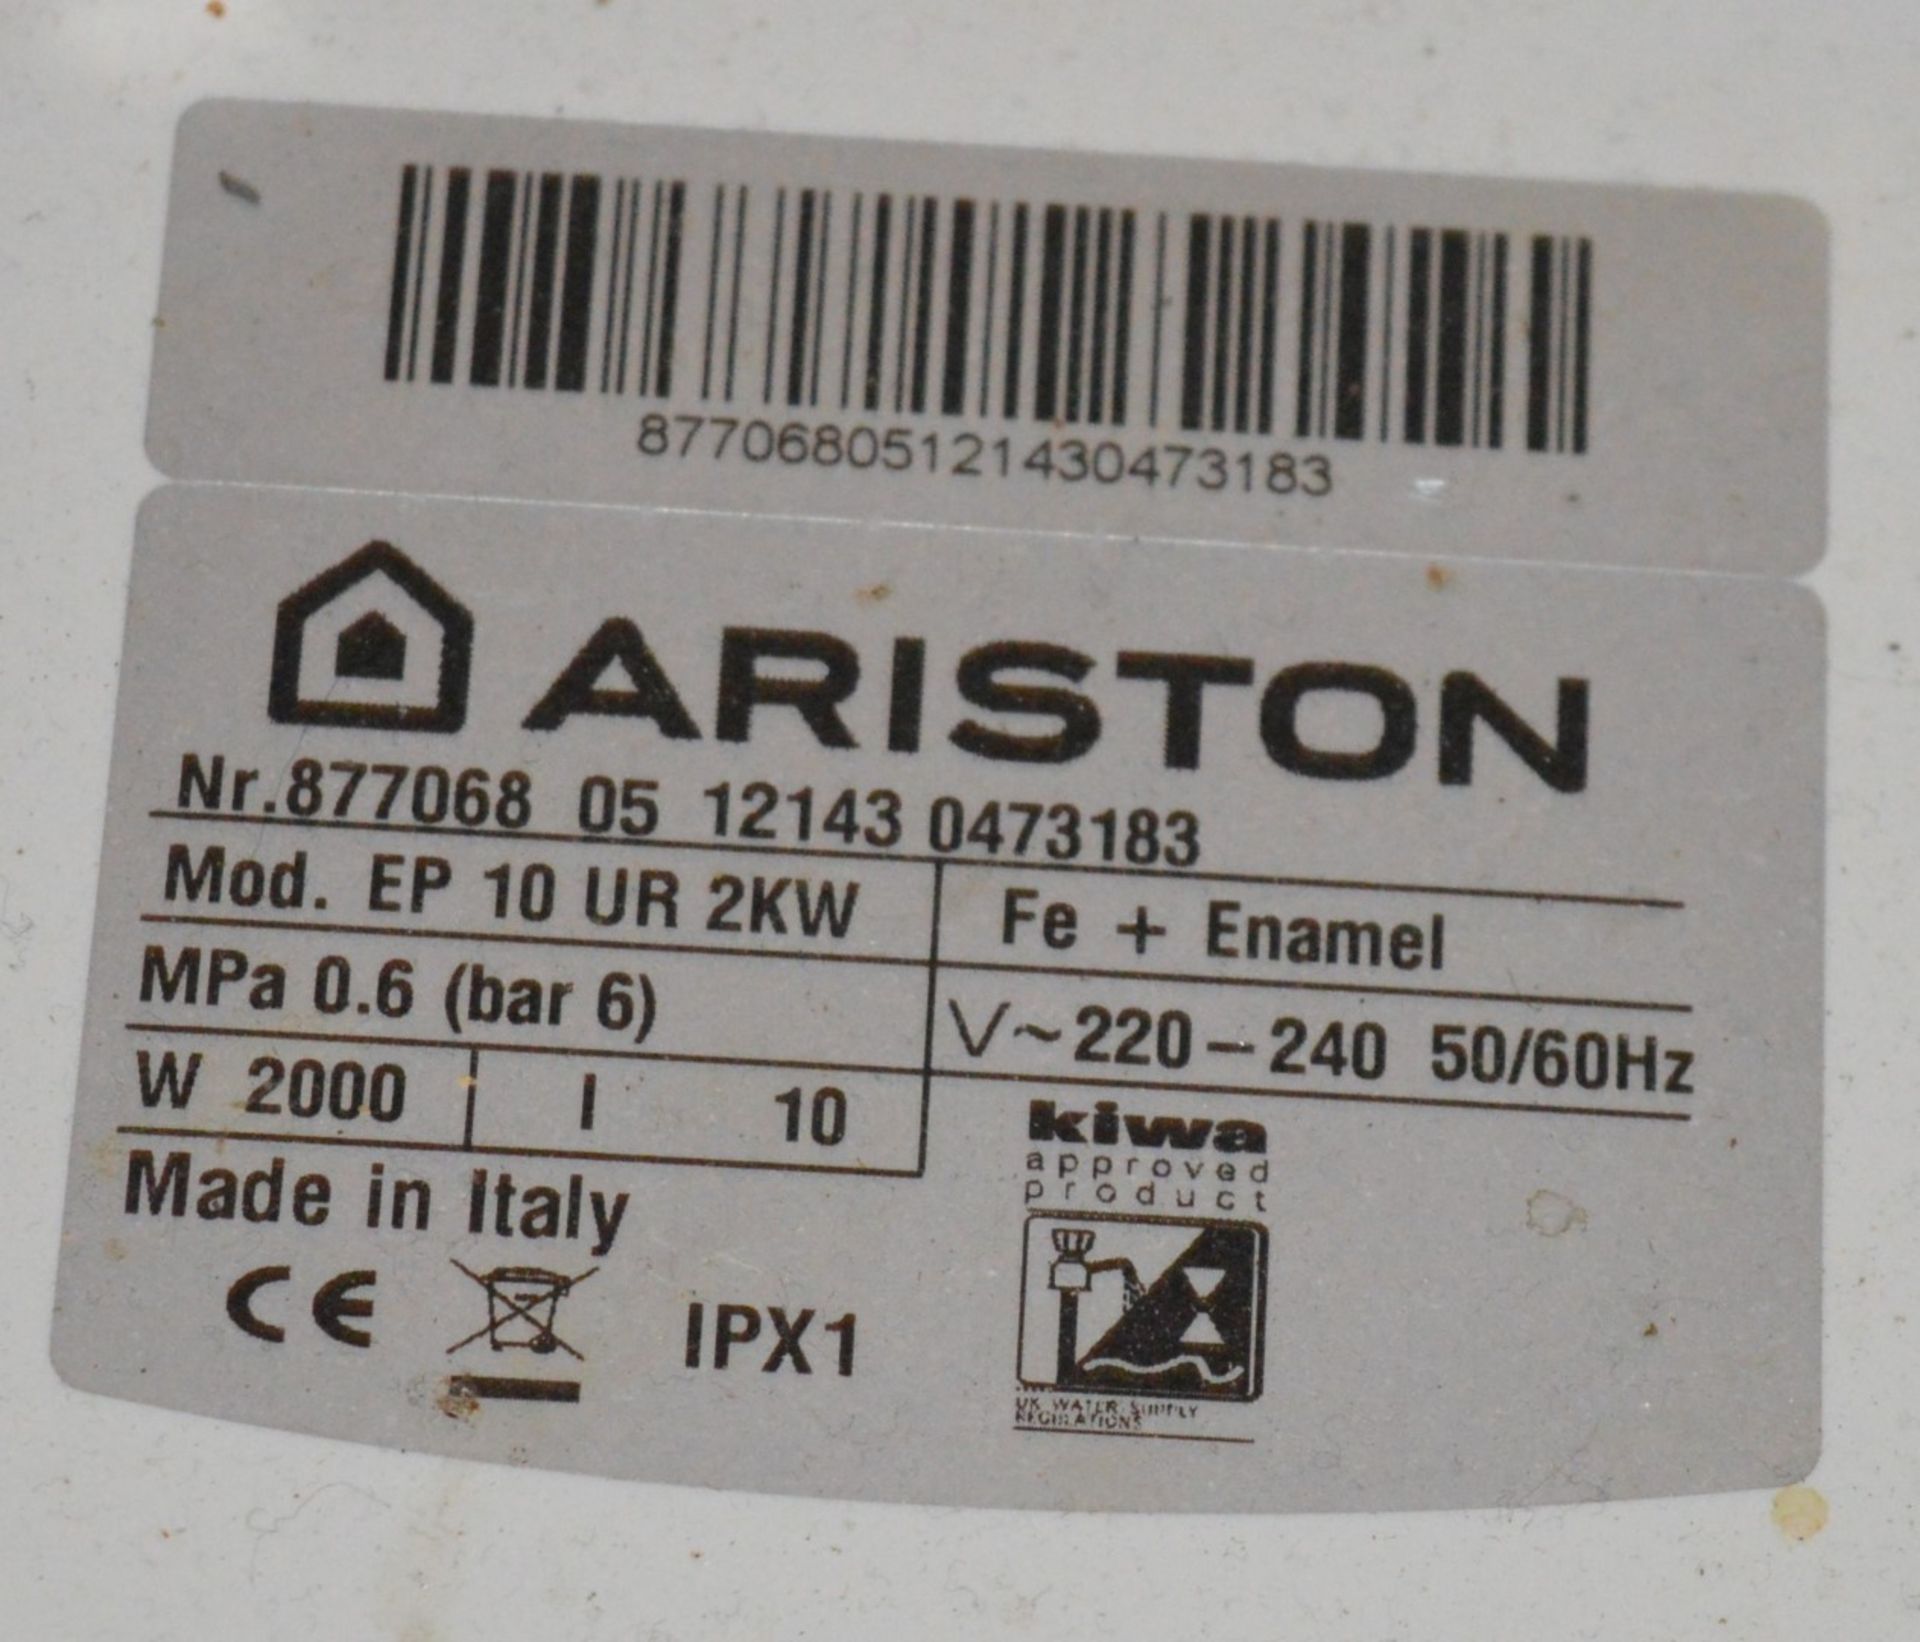 1 x Ariston Europrisma UNDER SINK Water Heater - 3kW 10 Litres - Model EP 10 UR 2KW - Ideal For - Image 3 of 3